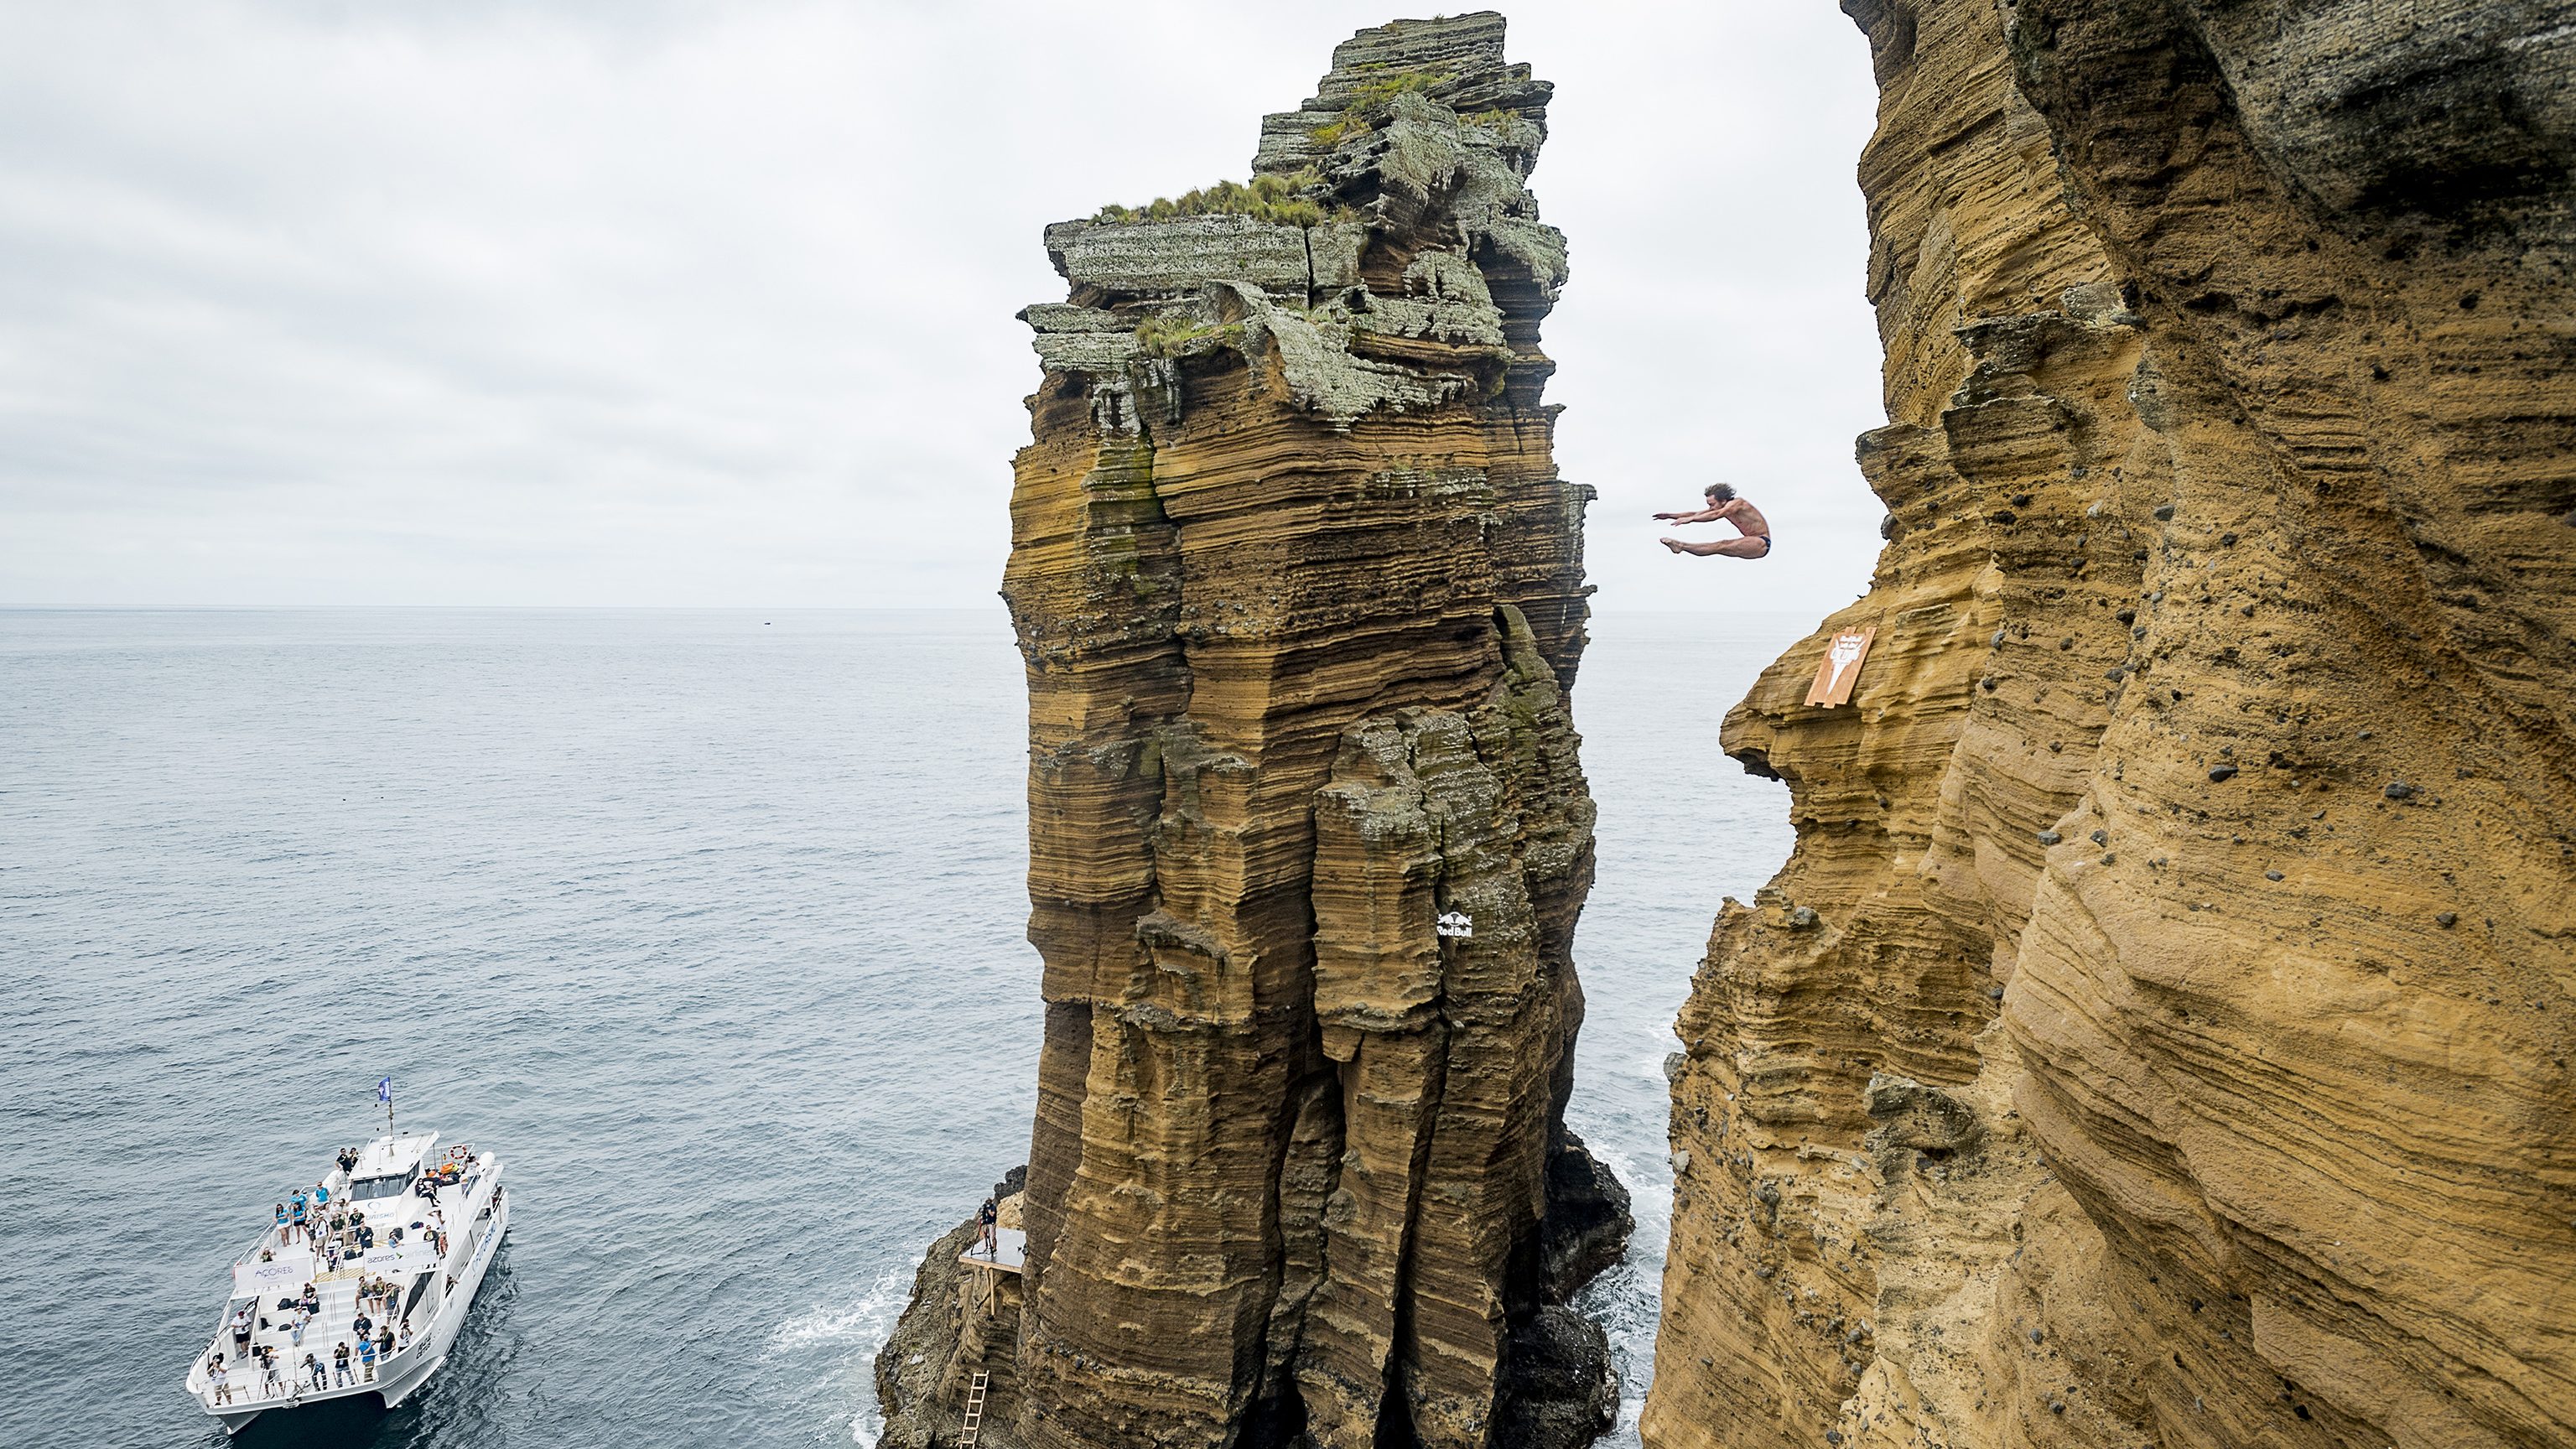 Gary Hunt, of the UK dives from 27 metres off the cliff at Islet Franca do Campo prior to third stop of the Red Bull Cliff Diving World Series, Sao Miguel, Azores, Portugal on July 8th 2016.  (Paulo Calisto/Red Bull Content Pool)